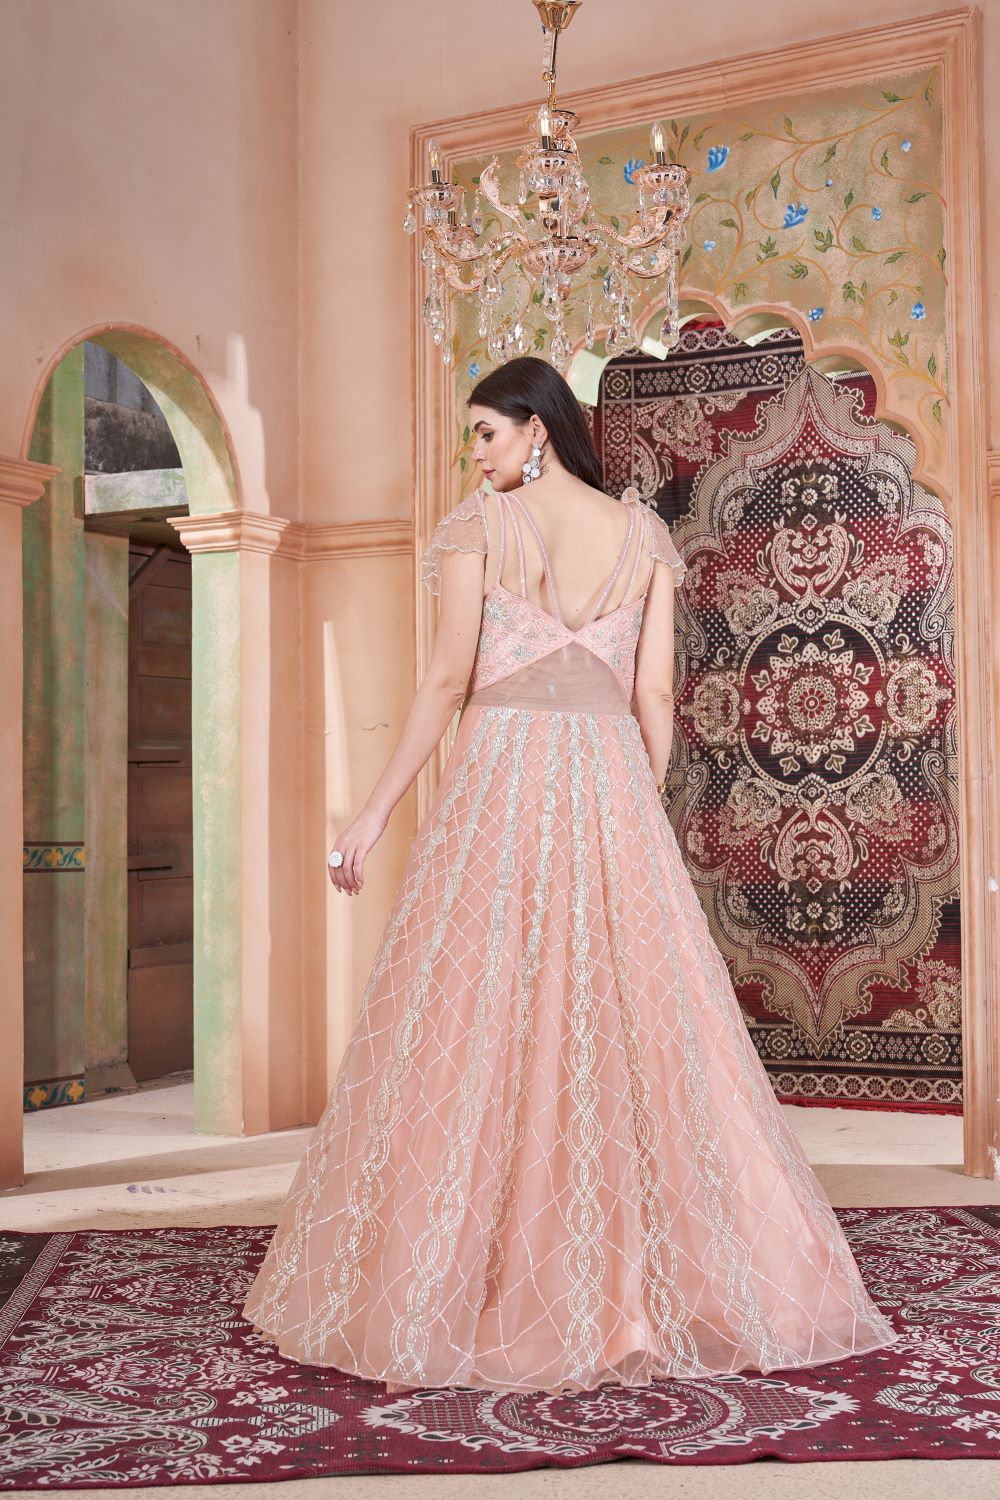 Blushing Elegance: Handcrafted Peach Perfection for Your Wedding Day